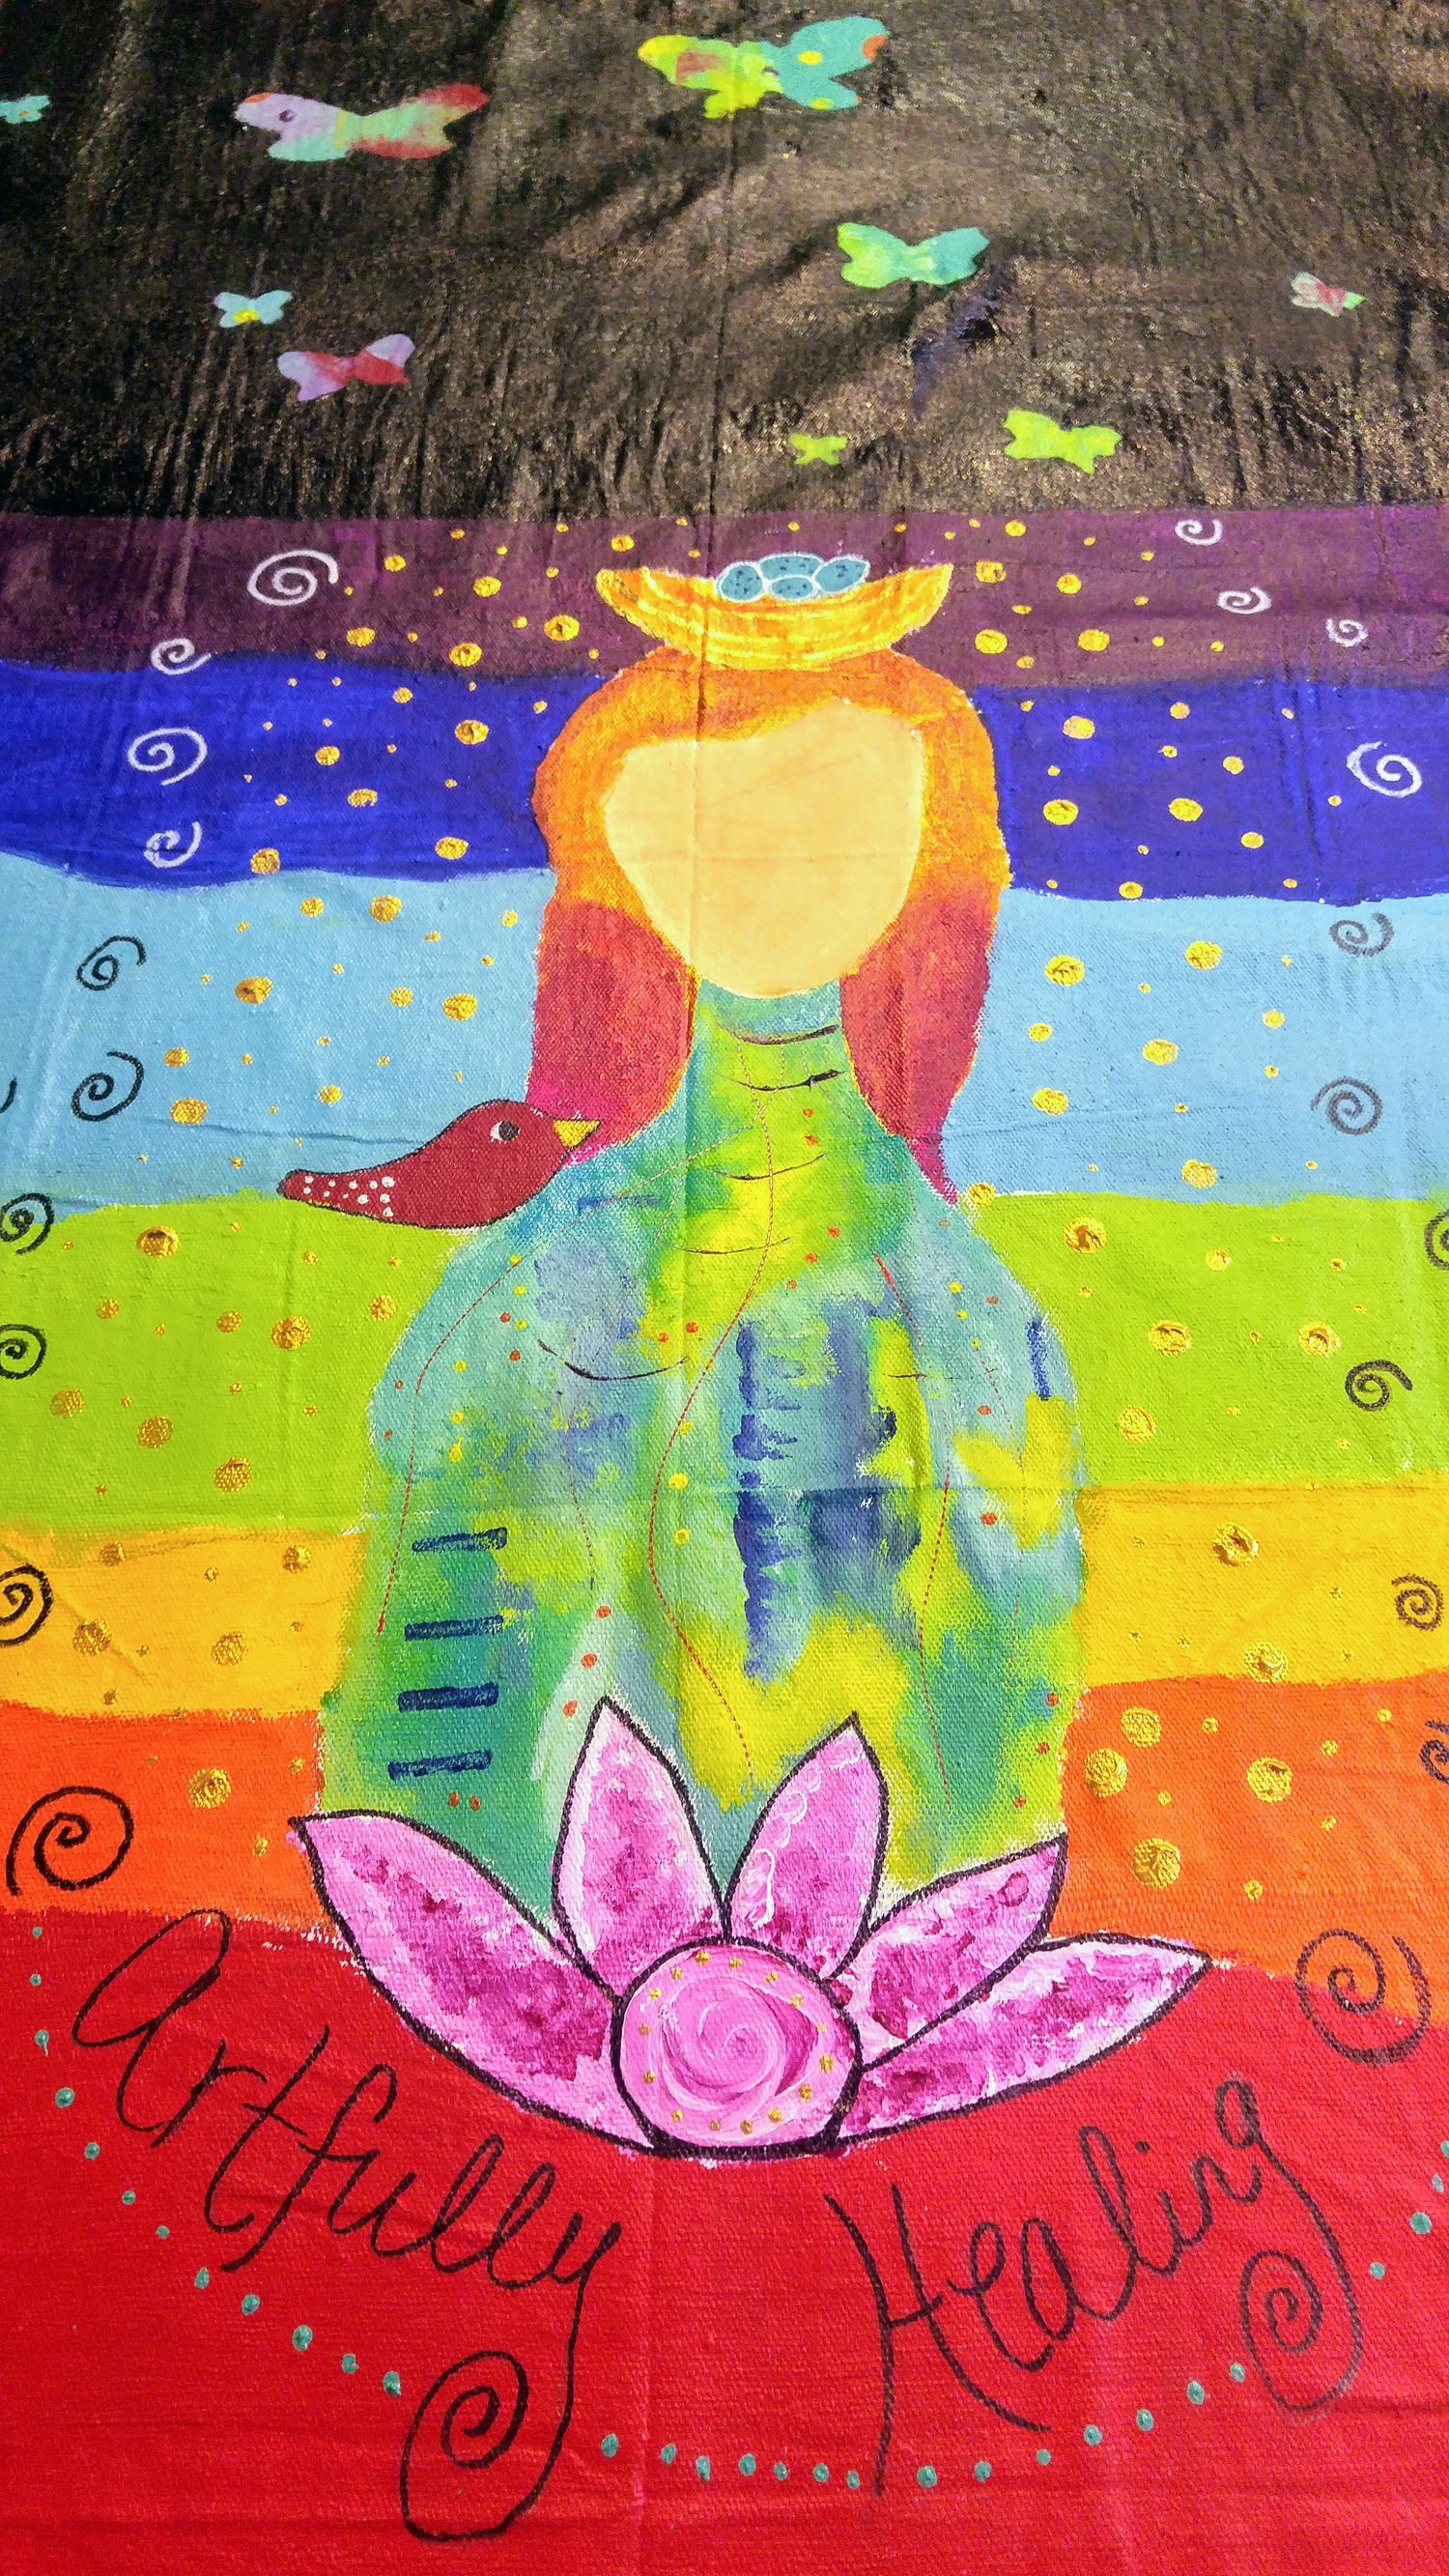 Artfully Healing with Toni Becker, mixed media art and therapeutic healing art service